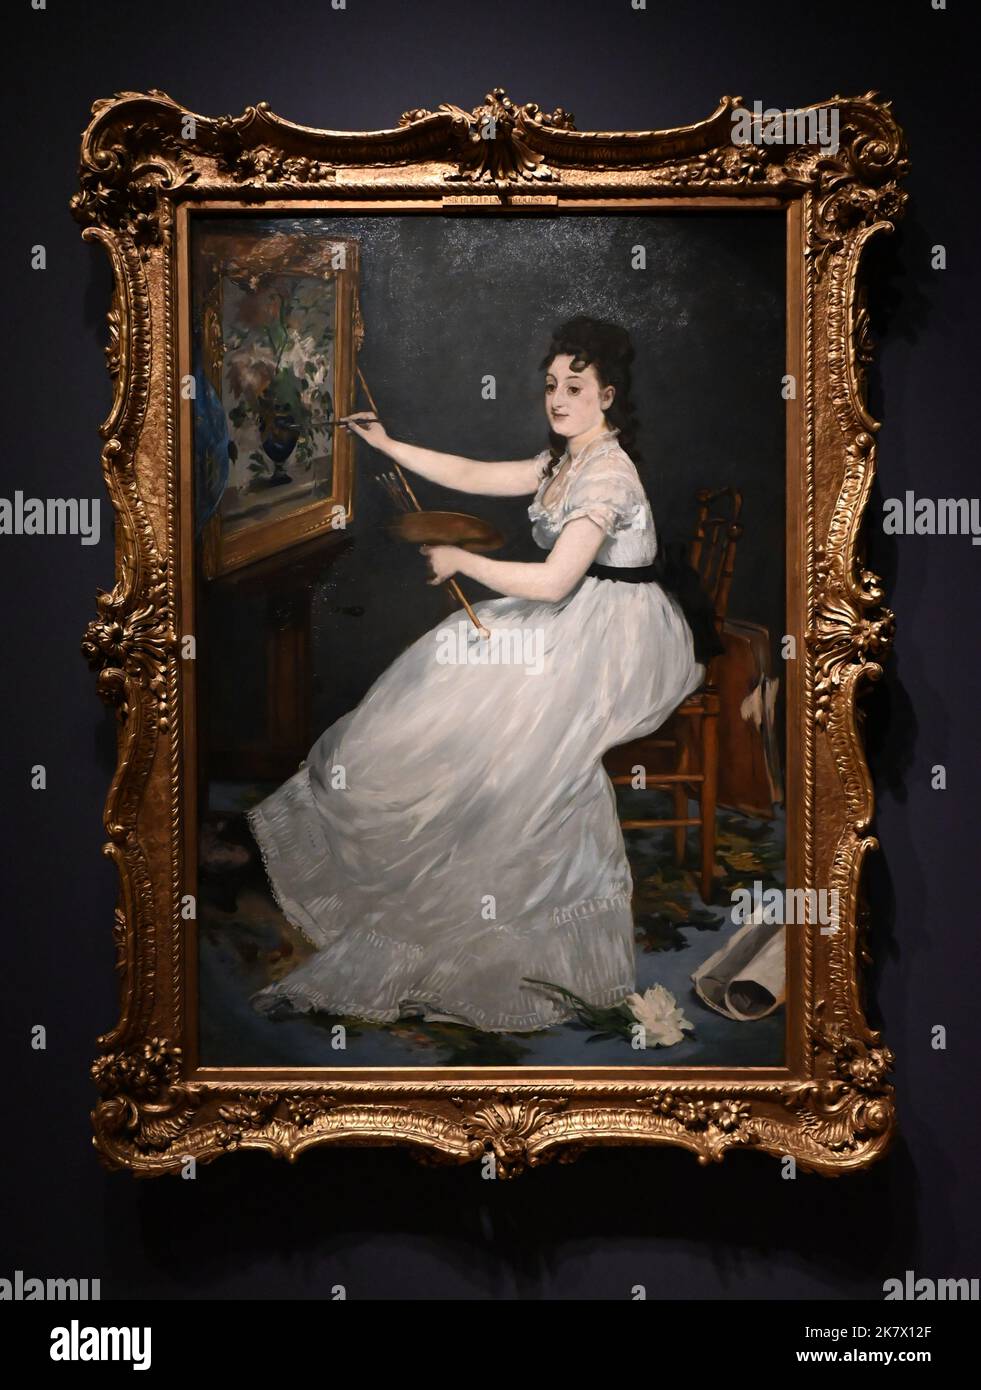 The first UK exhibition devised around the portrait of Eva Gonzalès (1870) by Édouard Manet (1832 –1883). The painting, acquired by Hugh Lane, was by the early 20th century considered to be the most famous modern French painting in the UK and Ireland. This is the first in a new series of ‘Discover’ exhibitions to be staged in the National Gallery’s Sunley Room to explore well-known paintings in the collection through a contemporary lens. The exhibition takes Manet’s portrait of Eva Gonzalès (1849–1883), as its focus, with the aim of presenting fresh perspectives on women artists ... Stock Photo